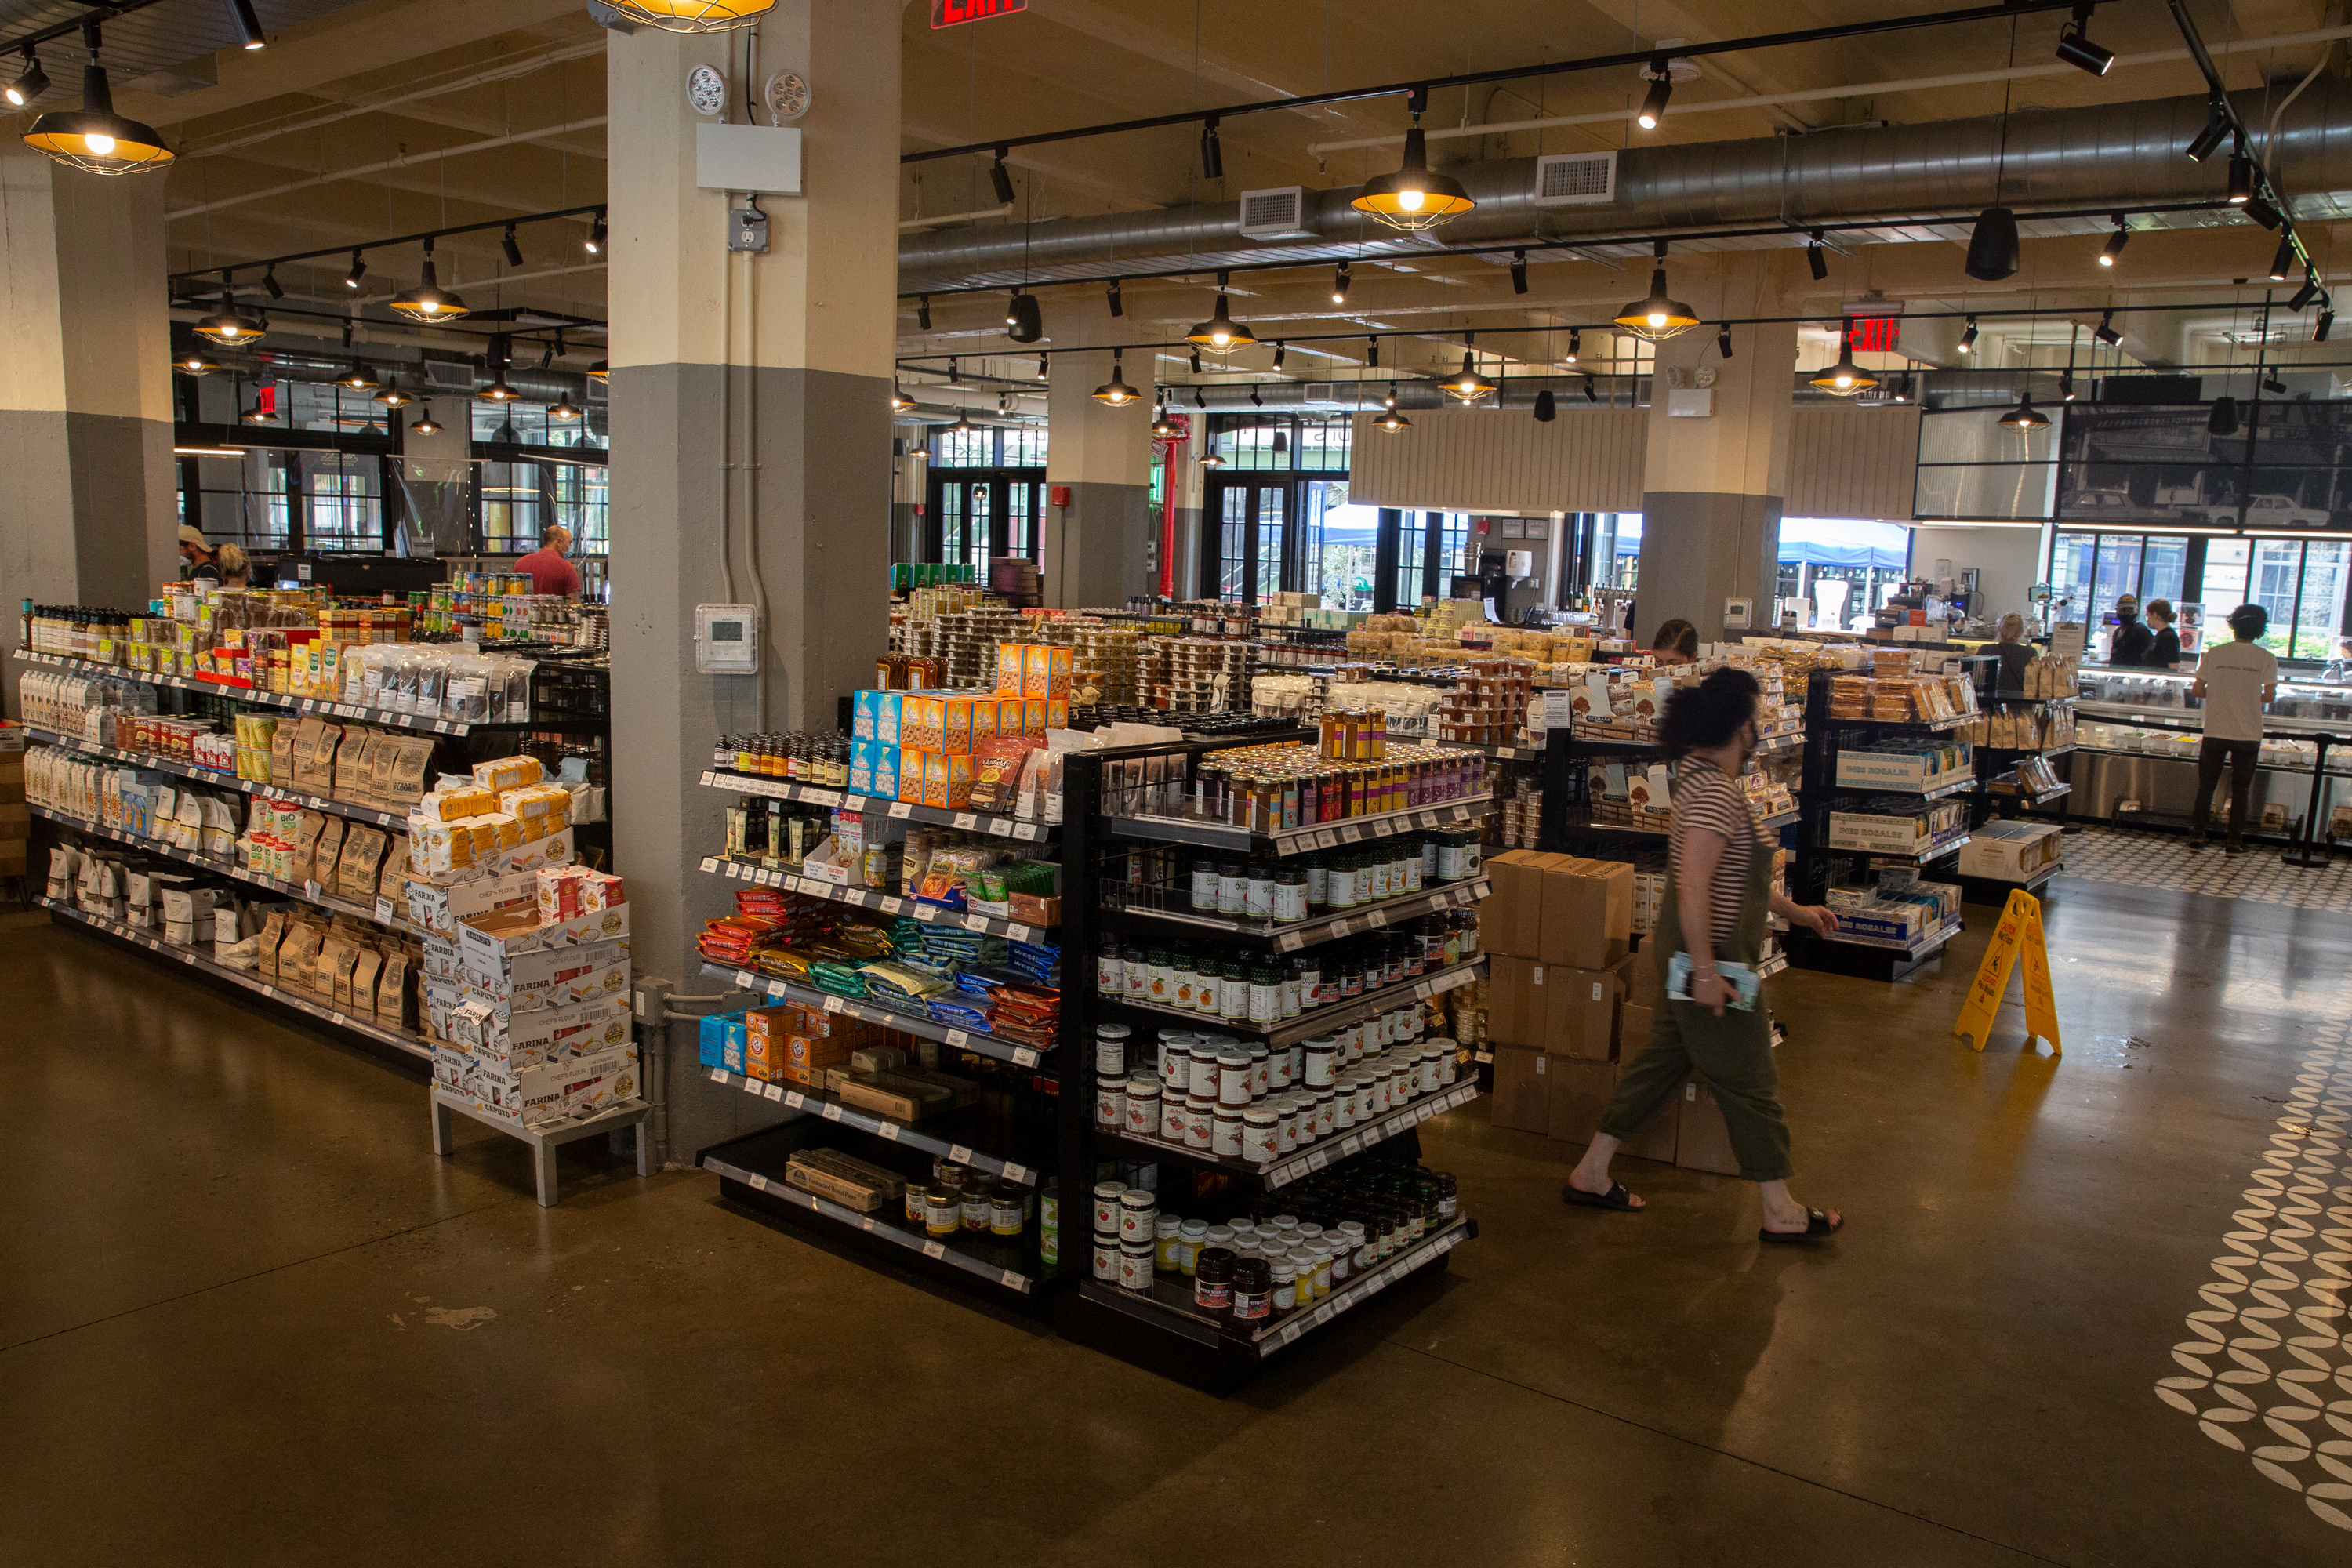 Middle Eastern grocer Sahadi’s Industry City location, Sept. 10, 2020.